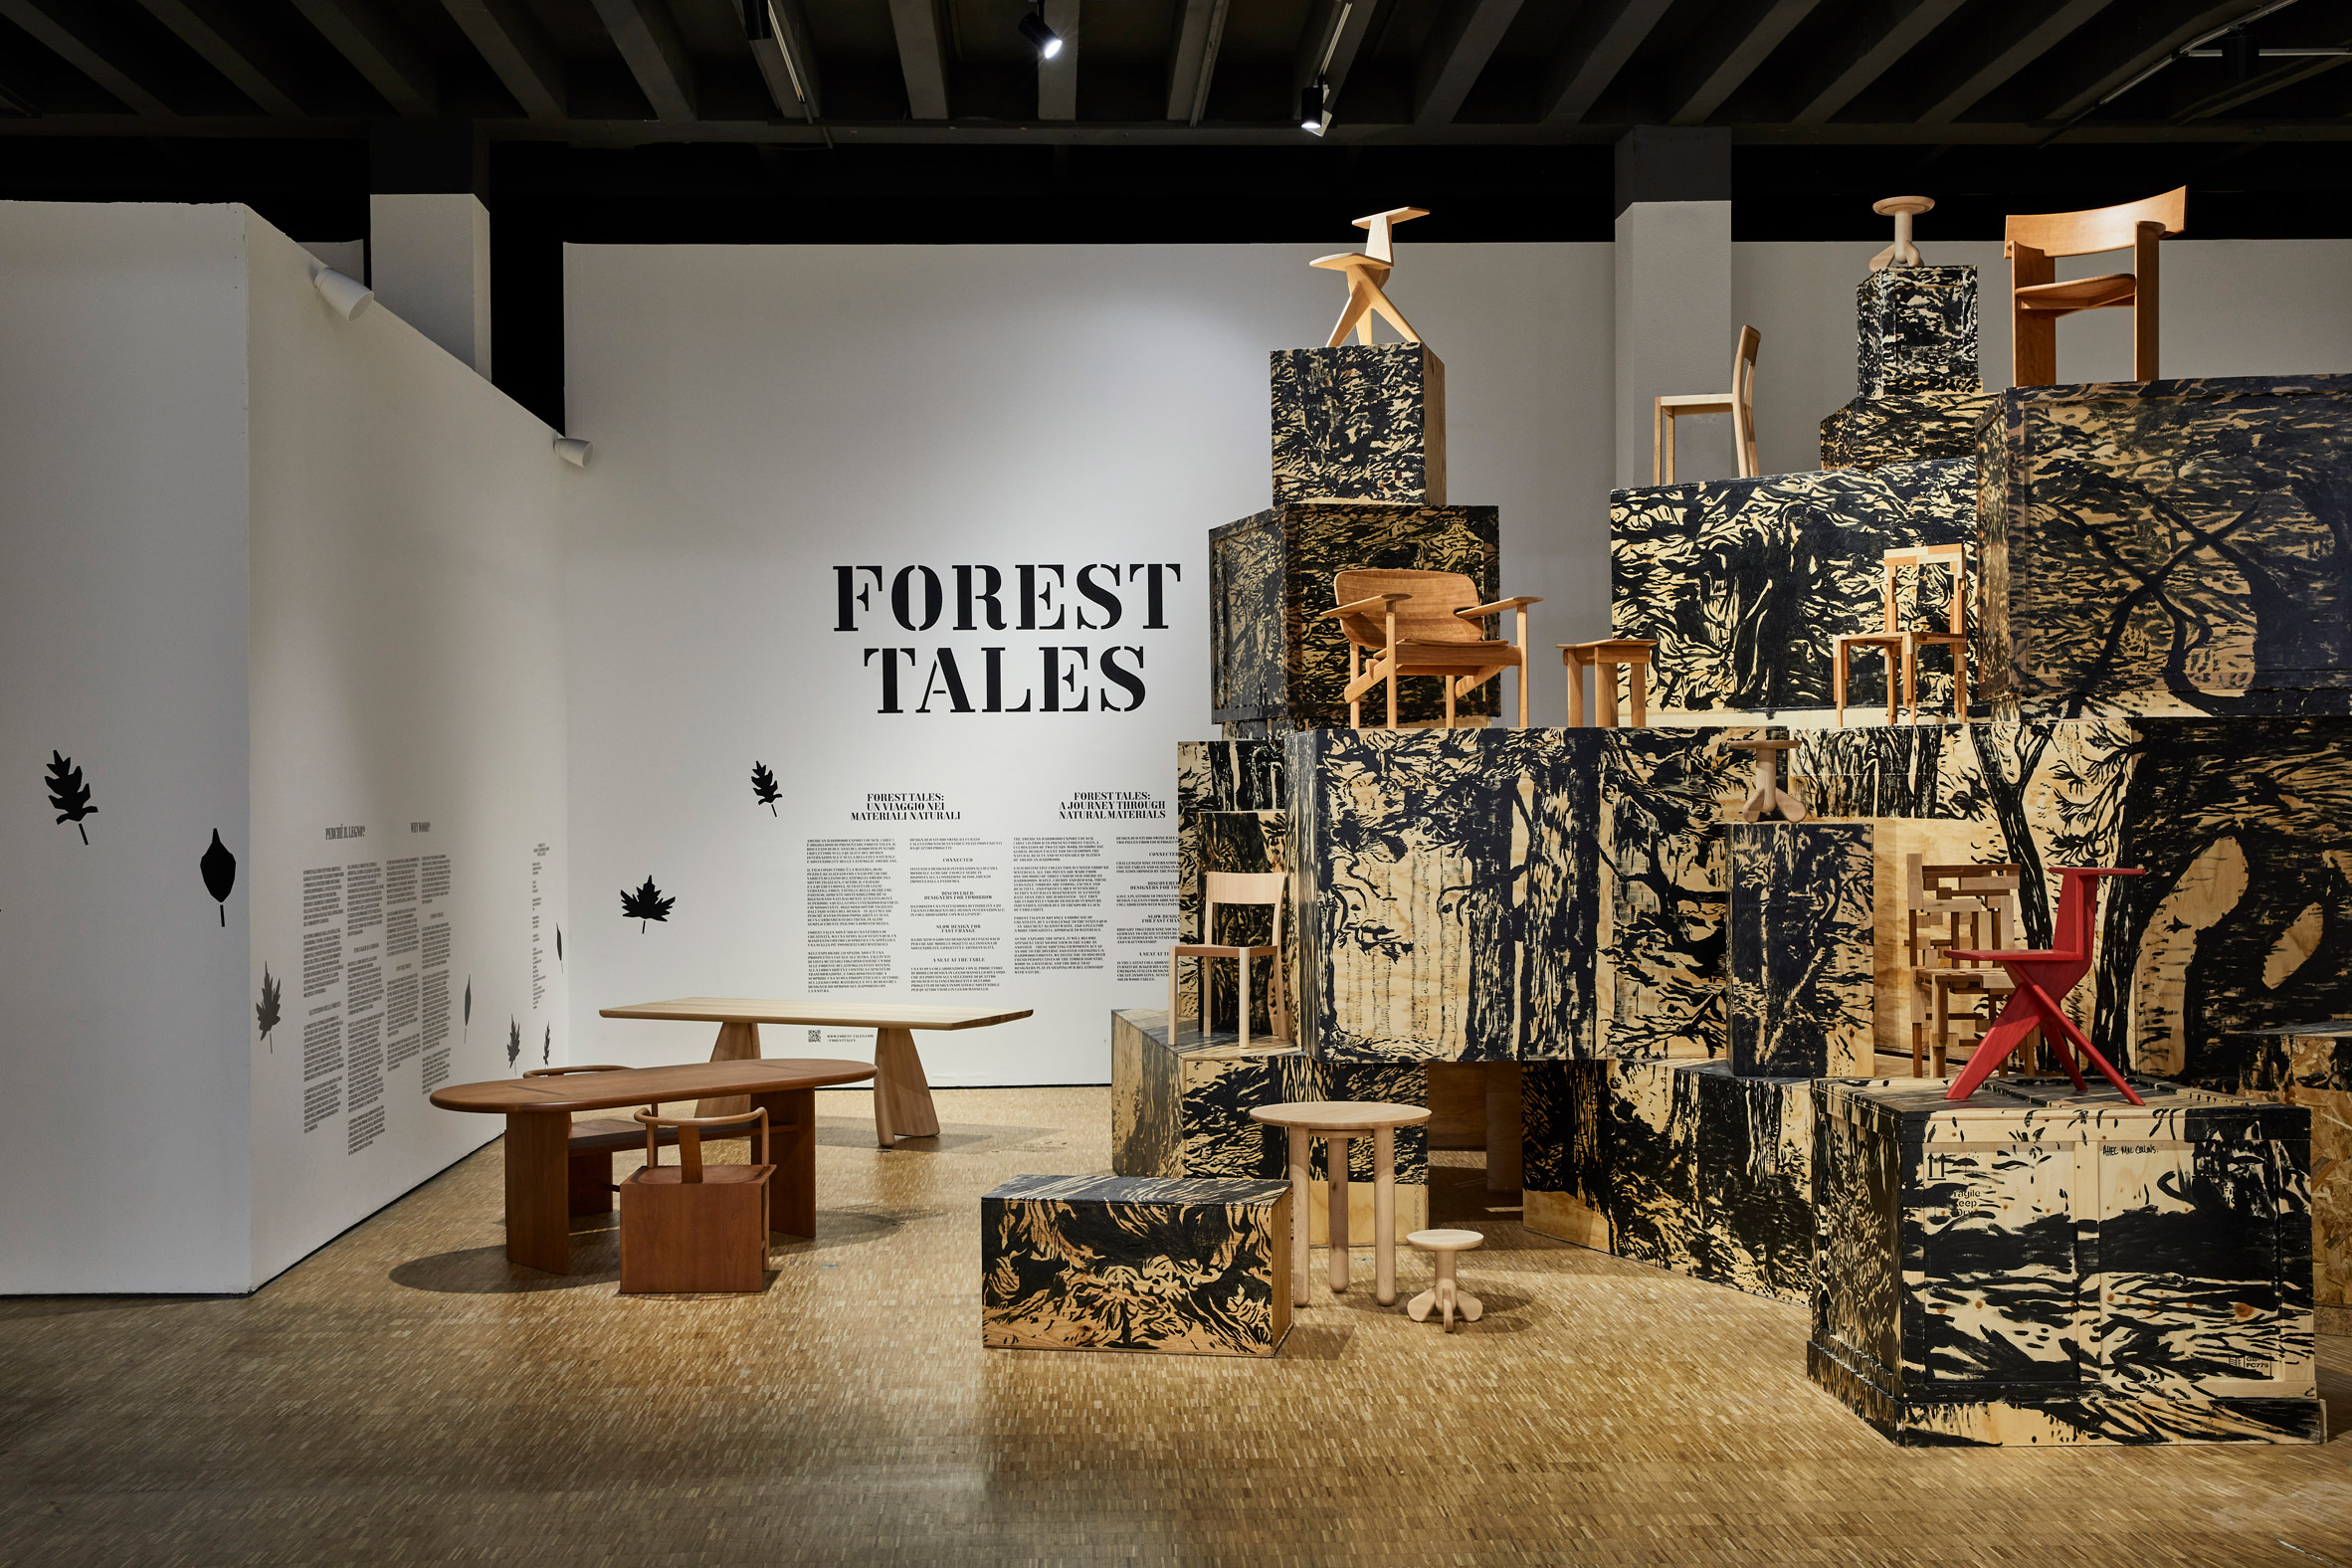 View of Forest Tales exhibition by Studio Swine